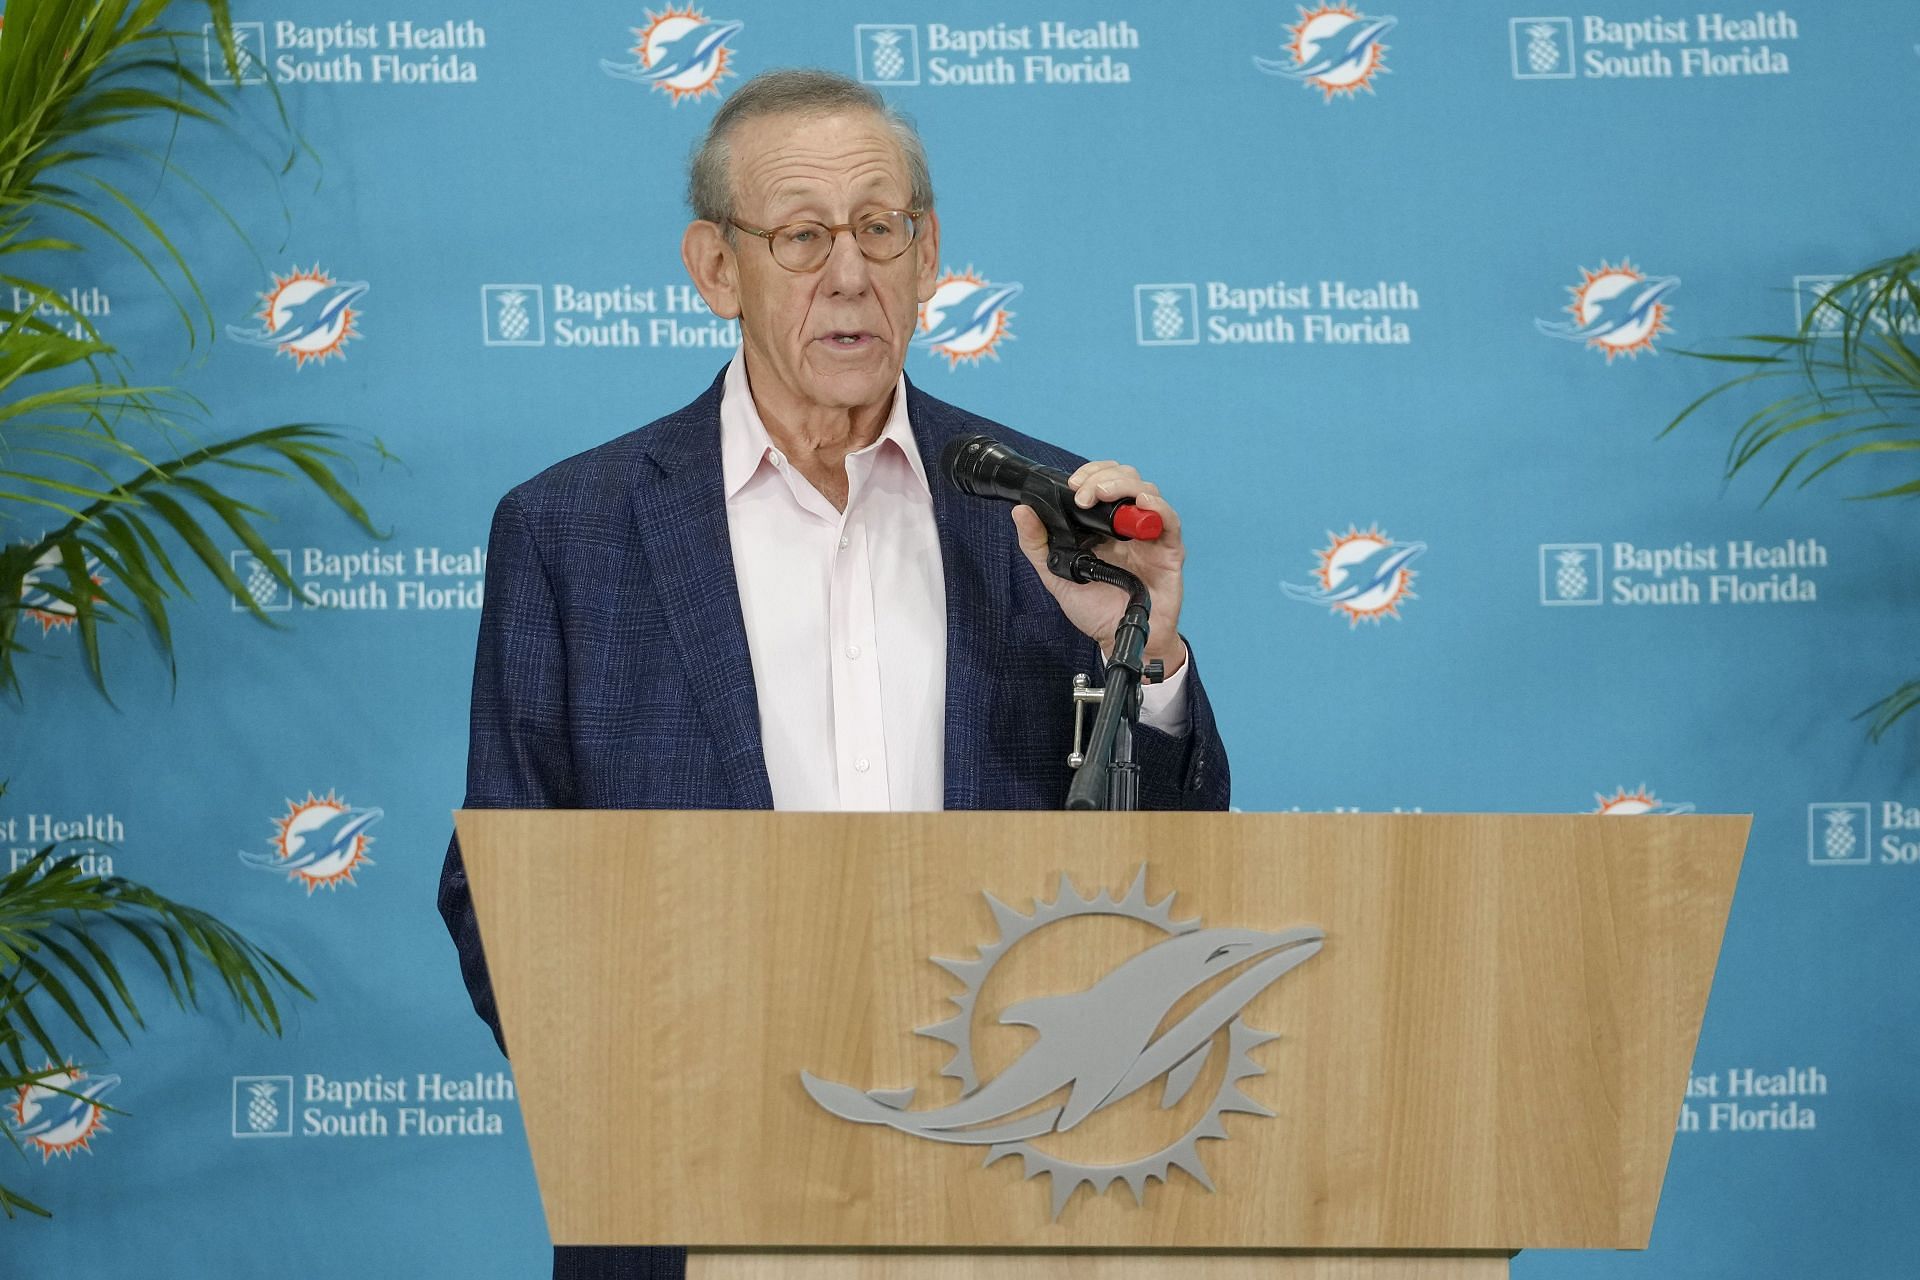 Miami Dolphins and Michigan alum Stephen Ross